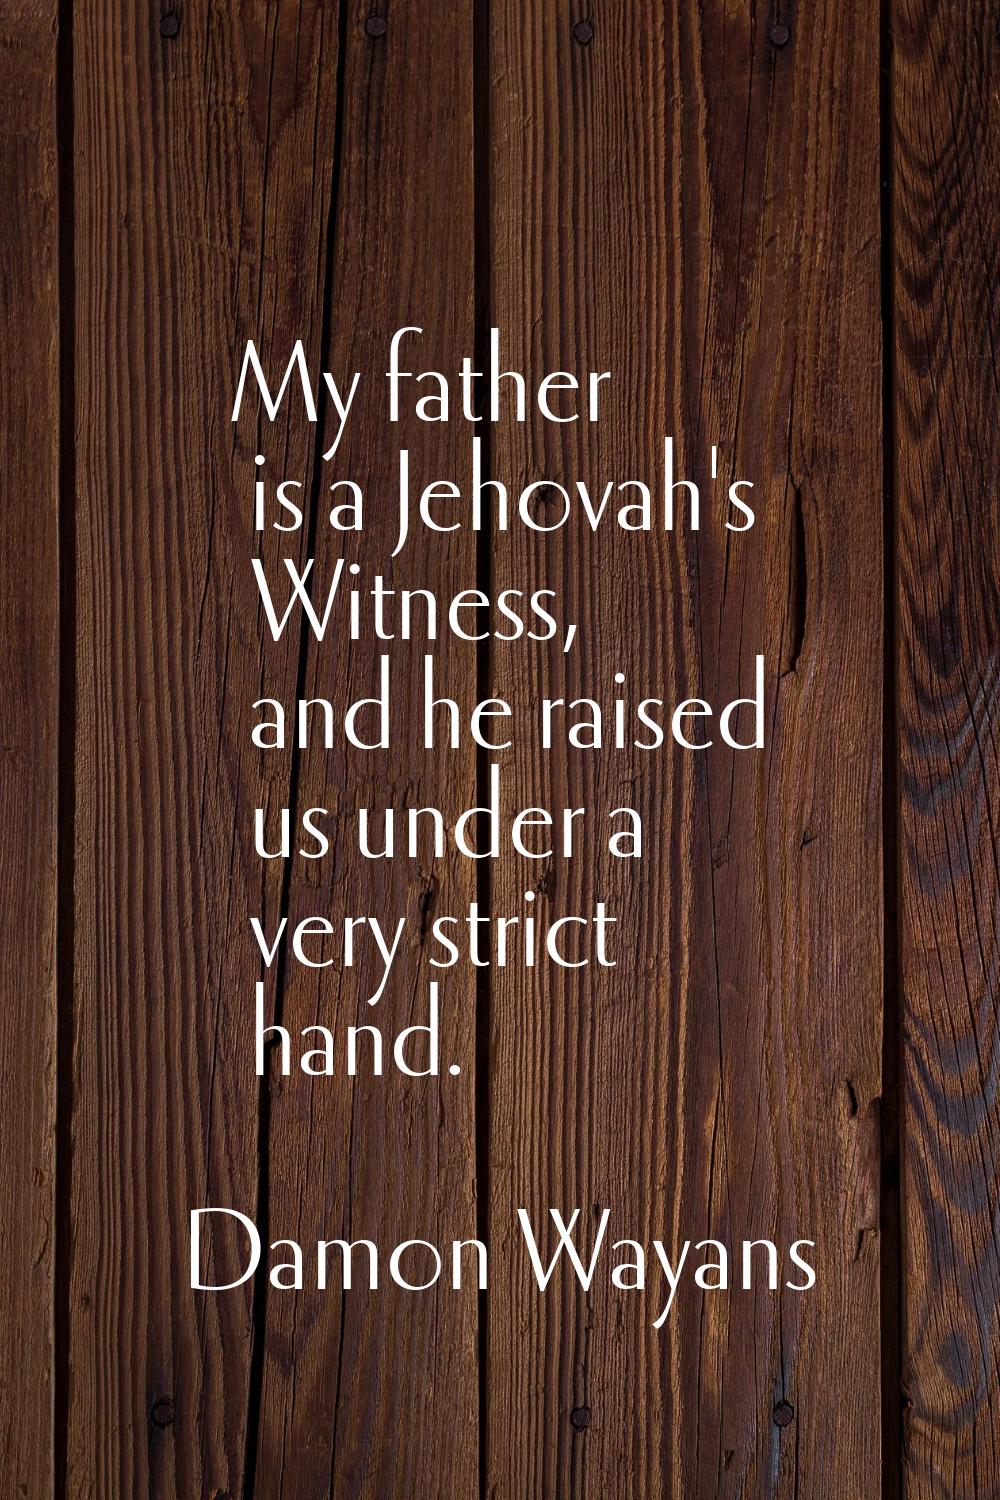 My father is a Jehovah's Witness, and he raised us under a very strict hand.